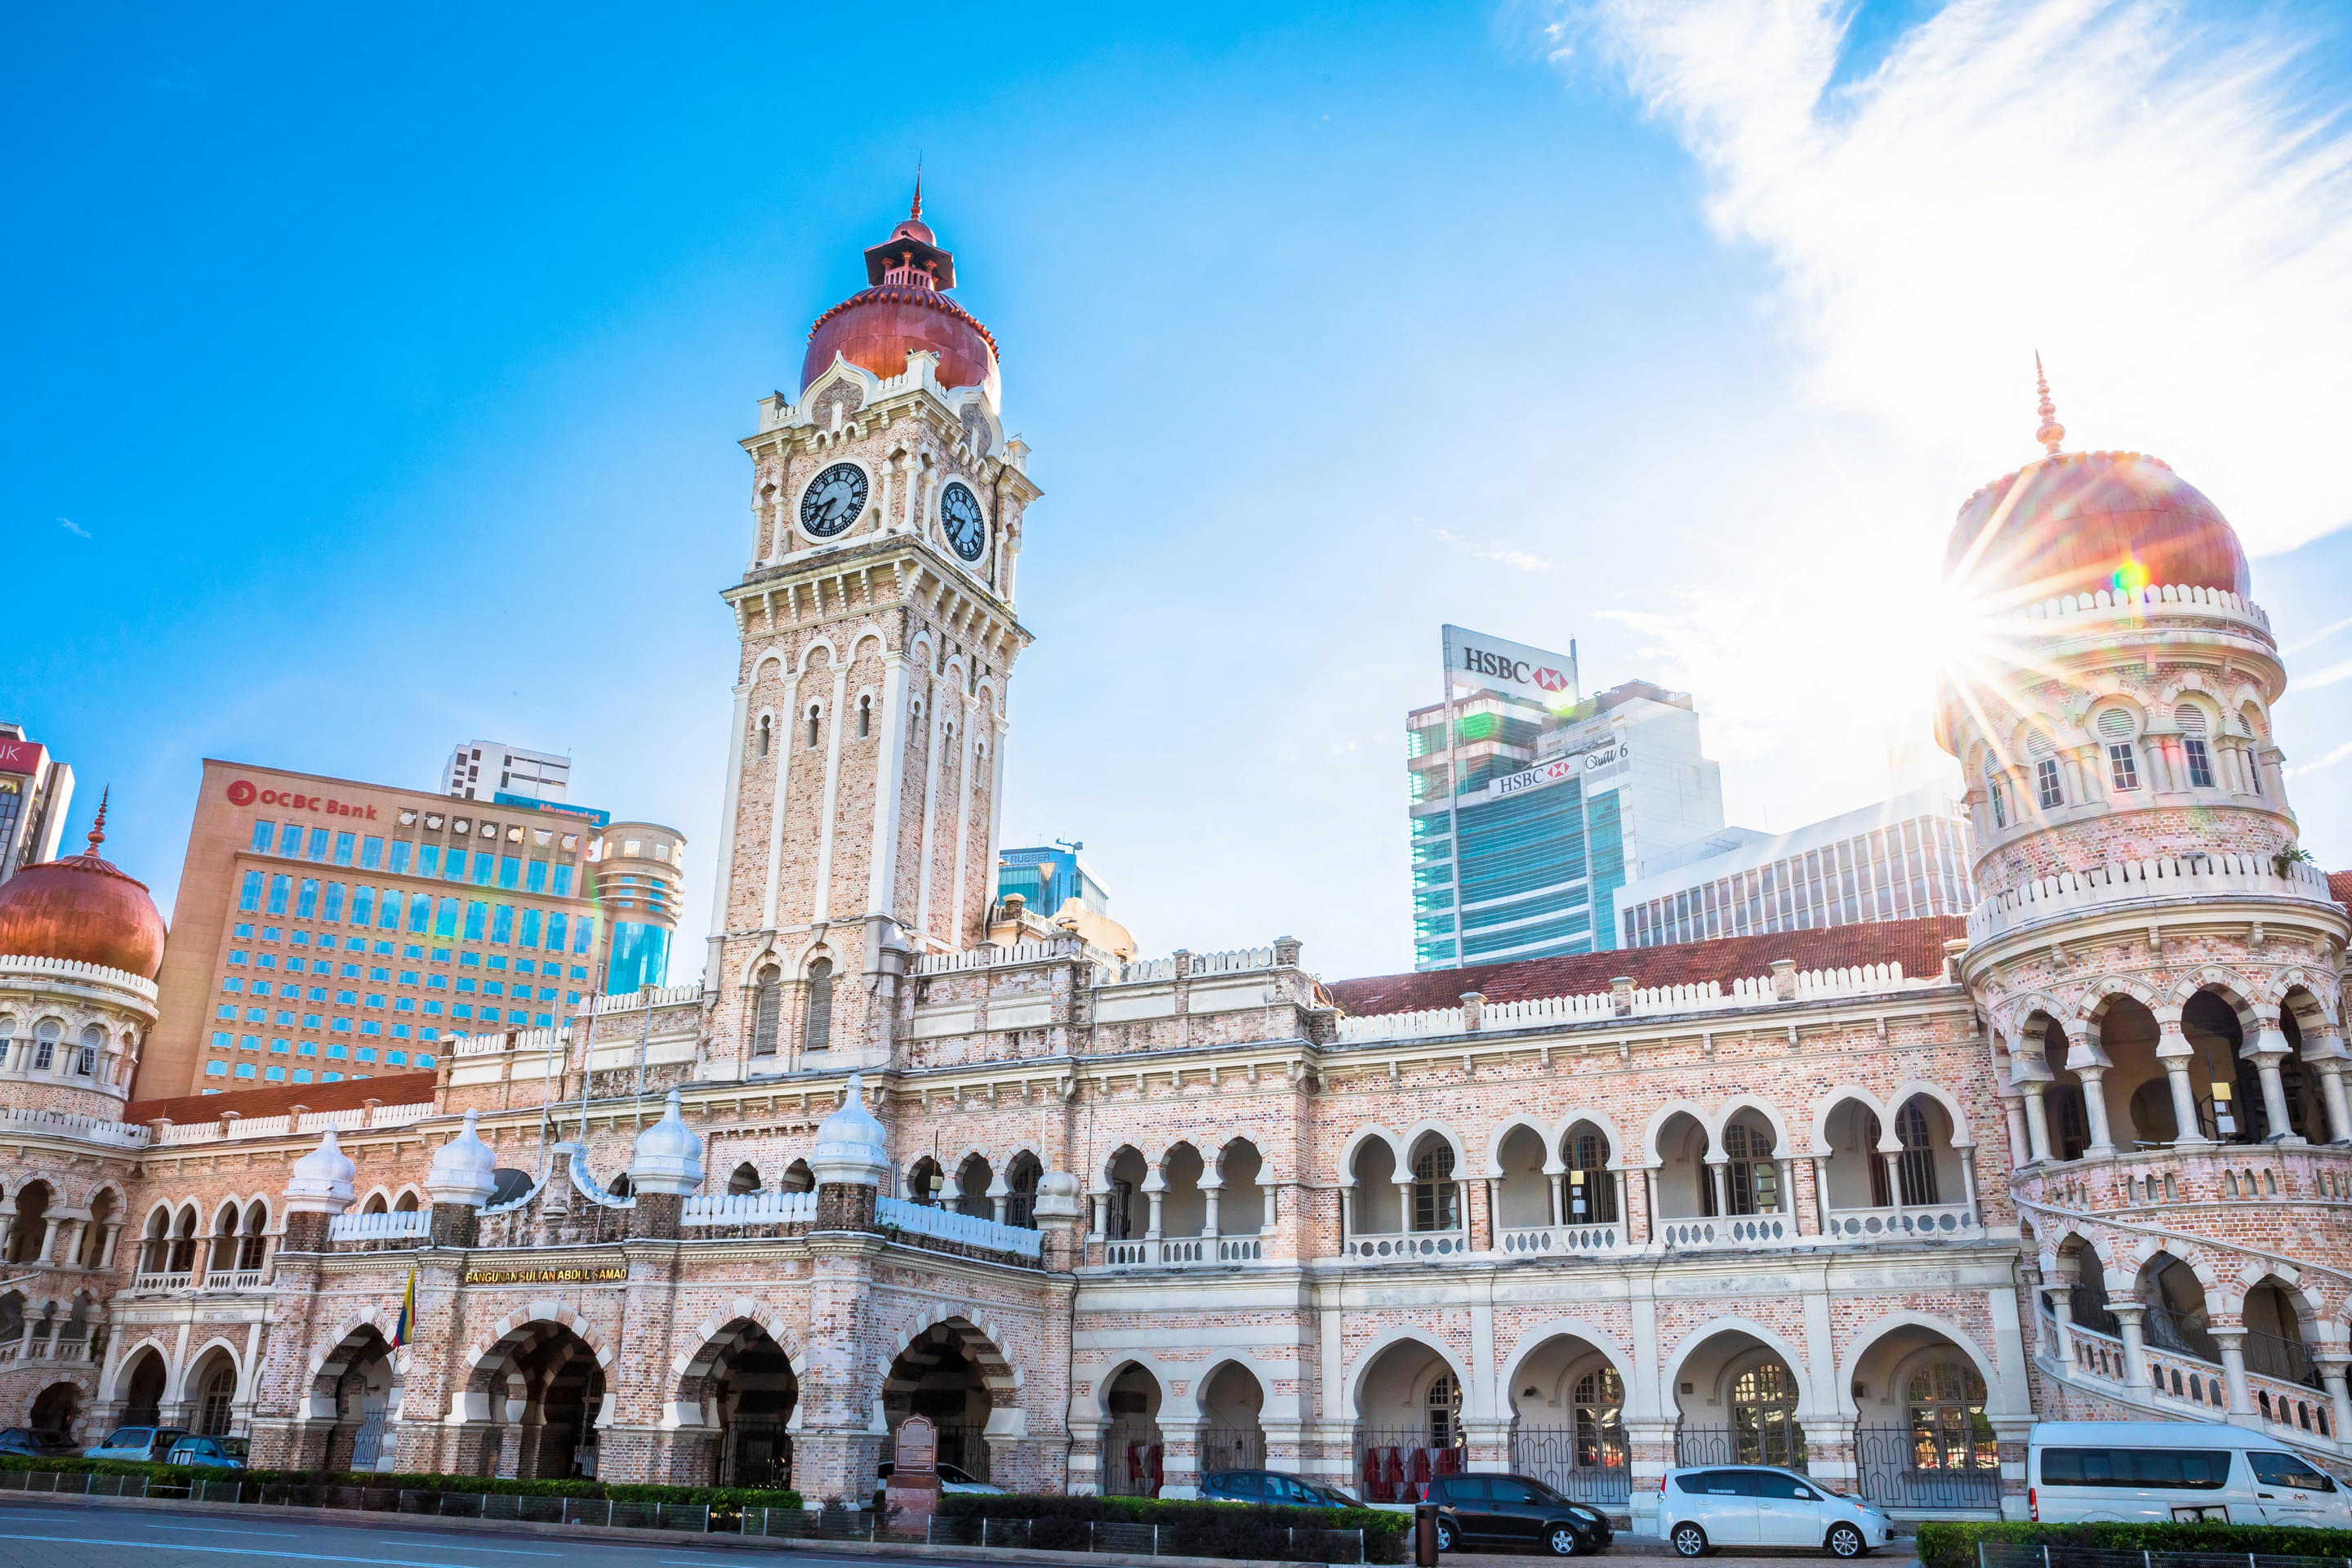 Sultan Abdul Samad Building Overview